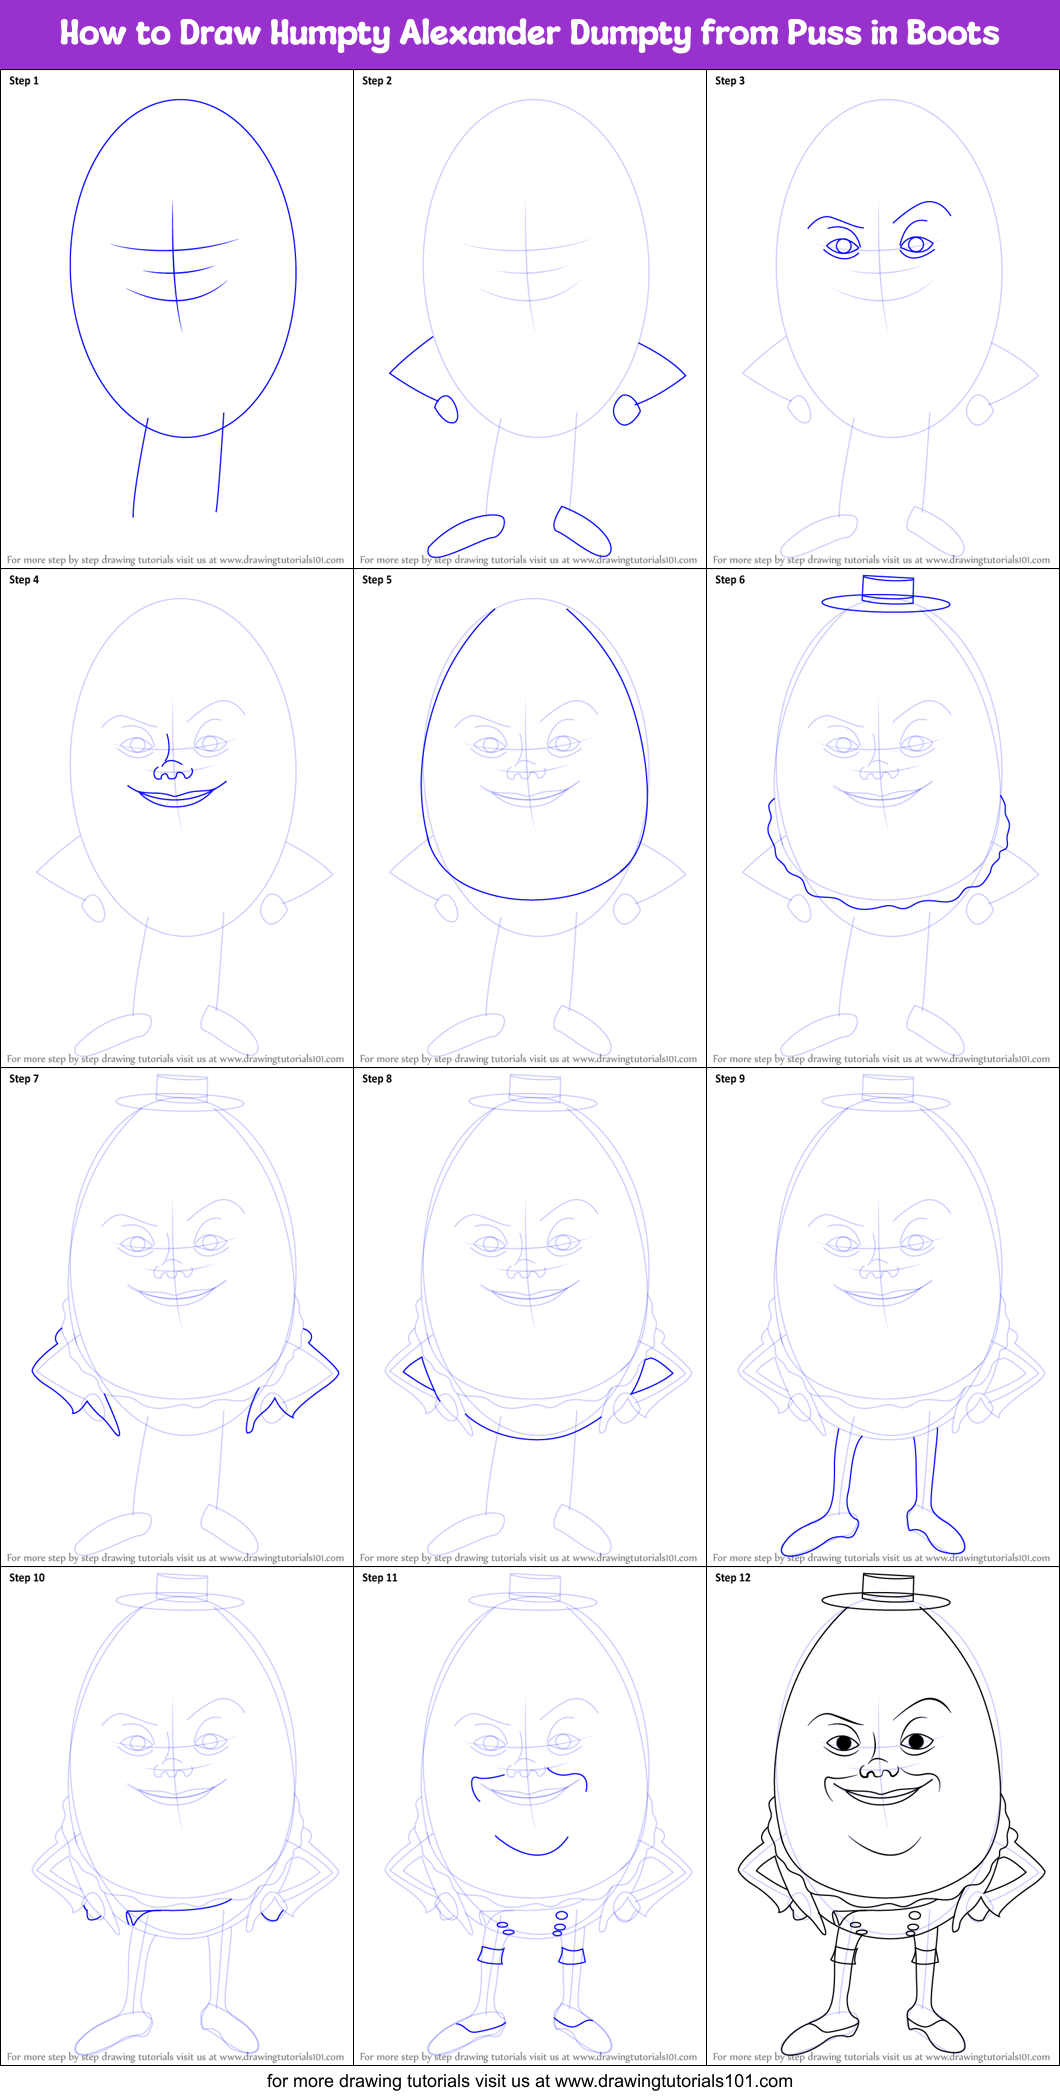 How to Draw Humpty Alexander Dumpty from Puss in Boots printable step